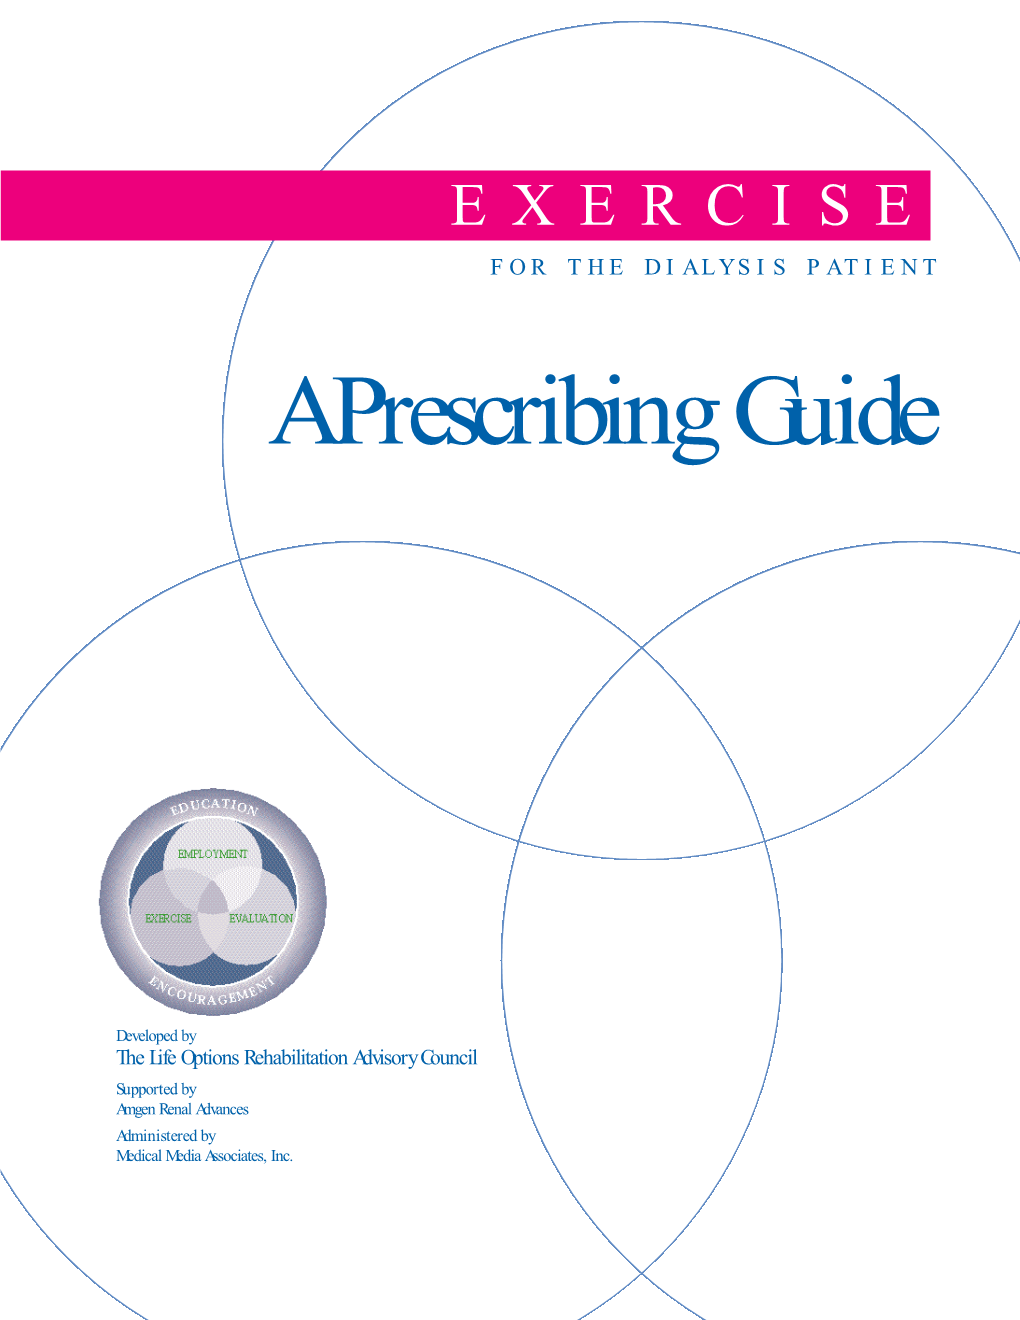 Exercise for the Dialysis Patient: a Prescribing Guide